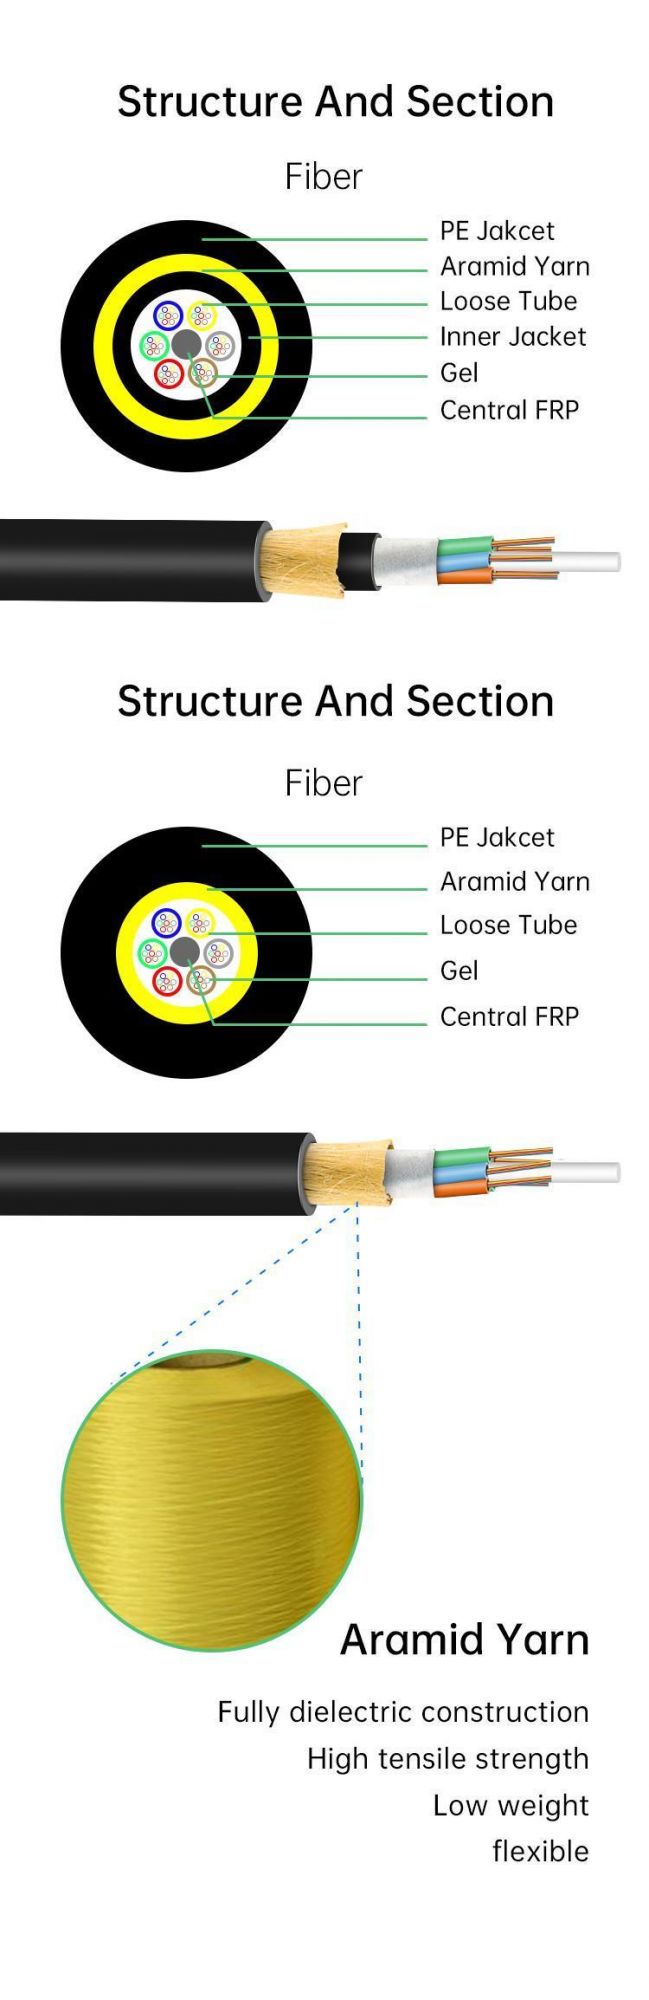 Single Mode Fibre Optic Lighting ADSS Fiber Optical Cable with Electrical Resistance at Sheath